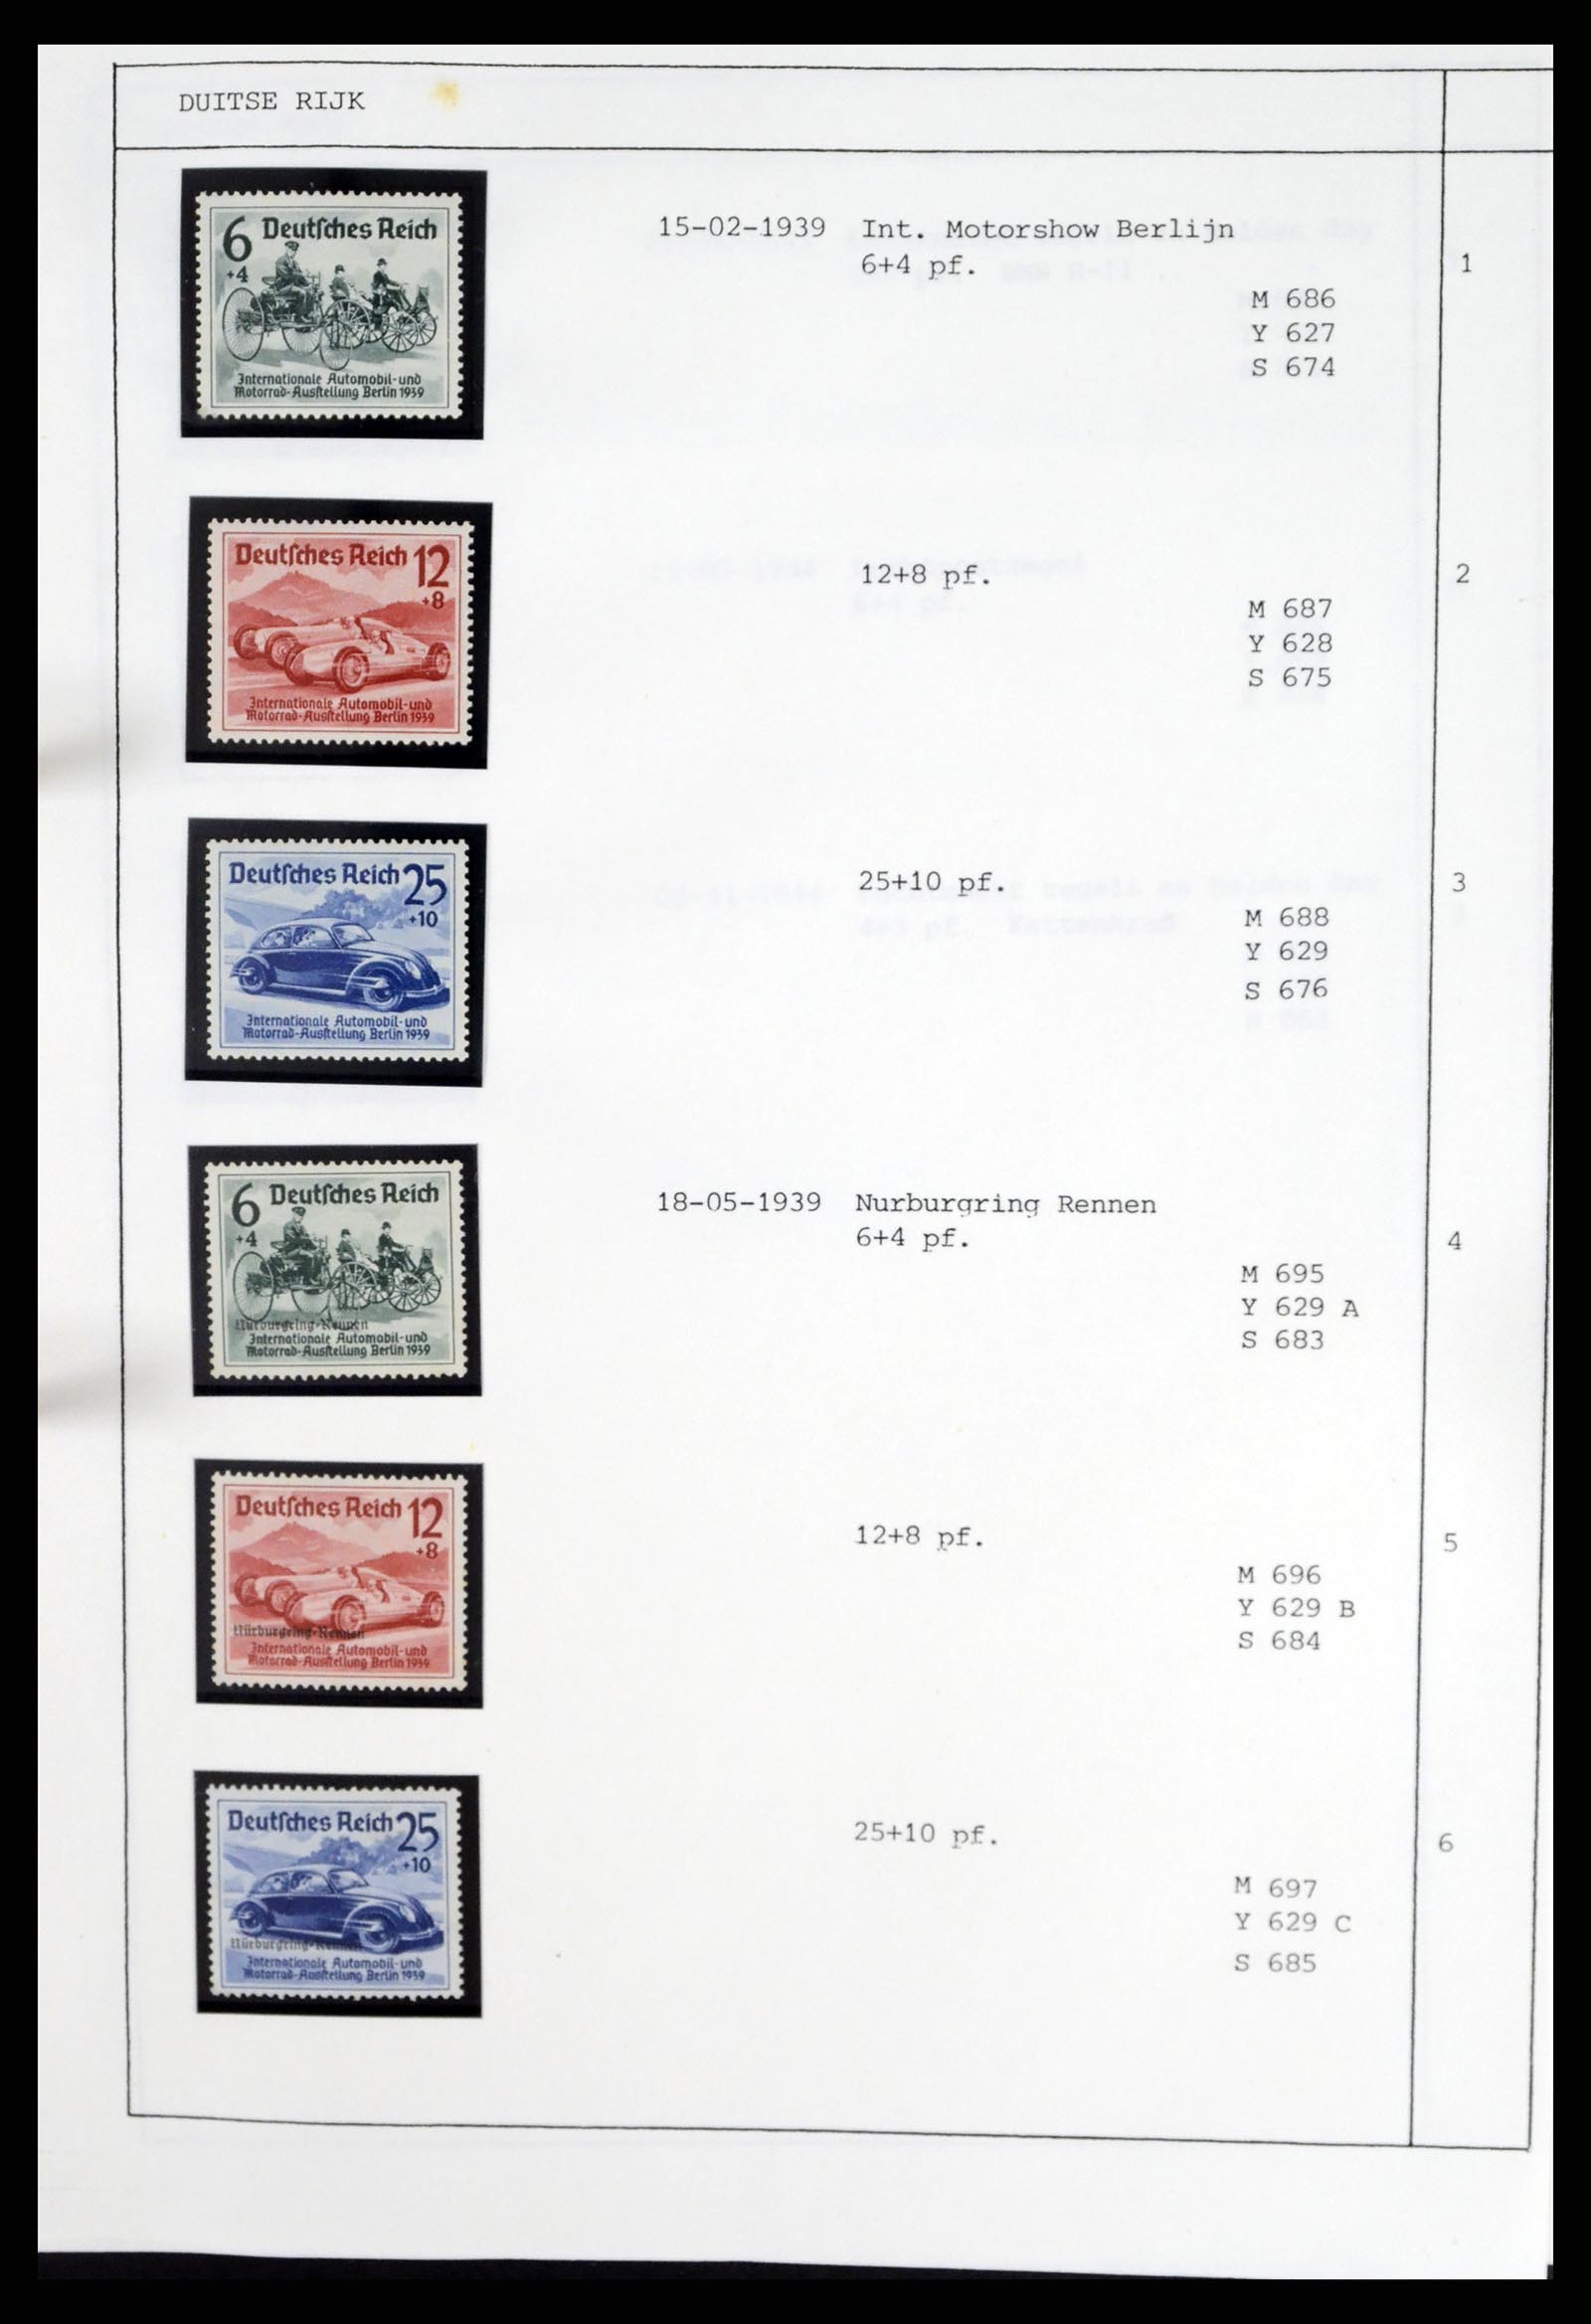 37462 063 - Stamp collection 37462 Thematics Motorcycles 1922-2000.